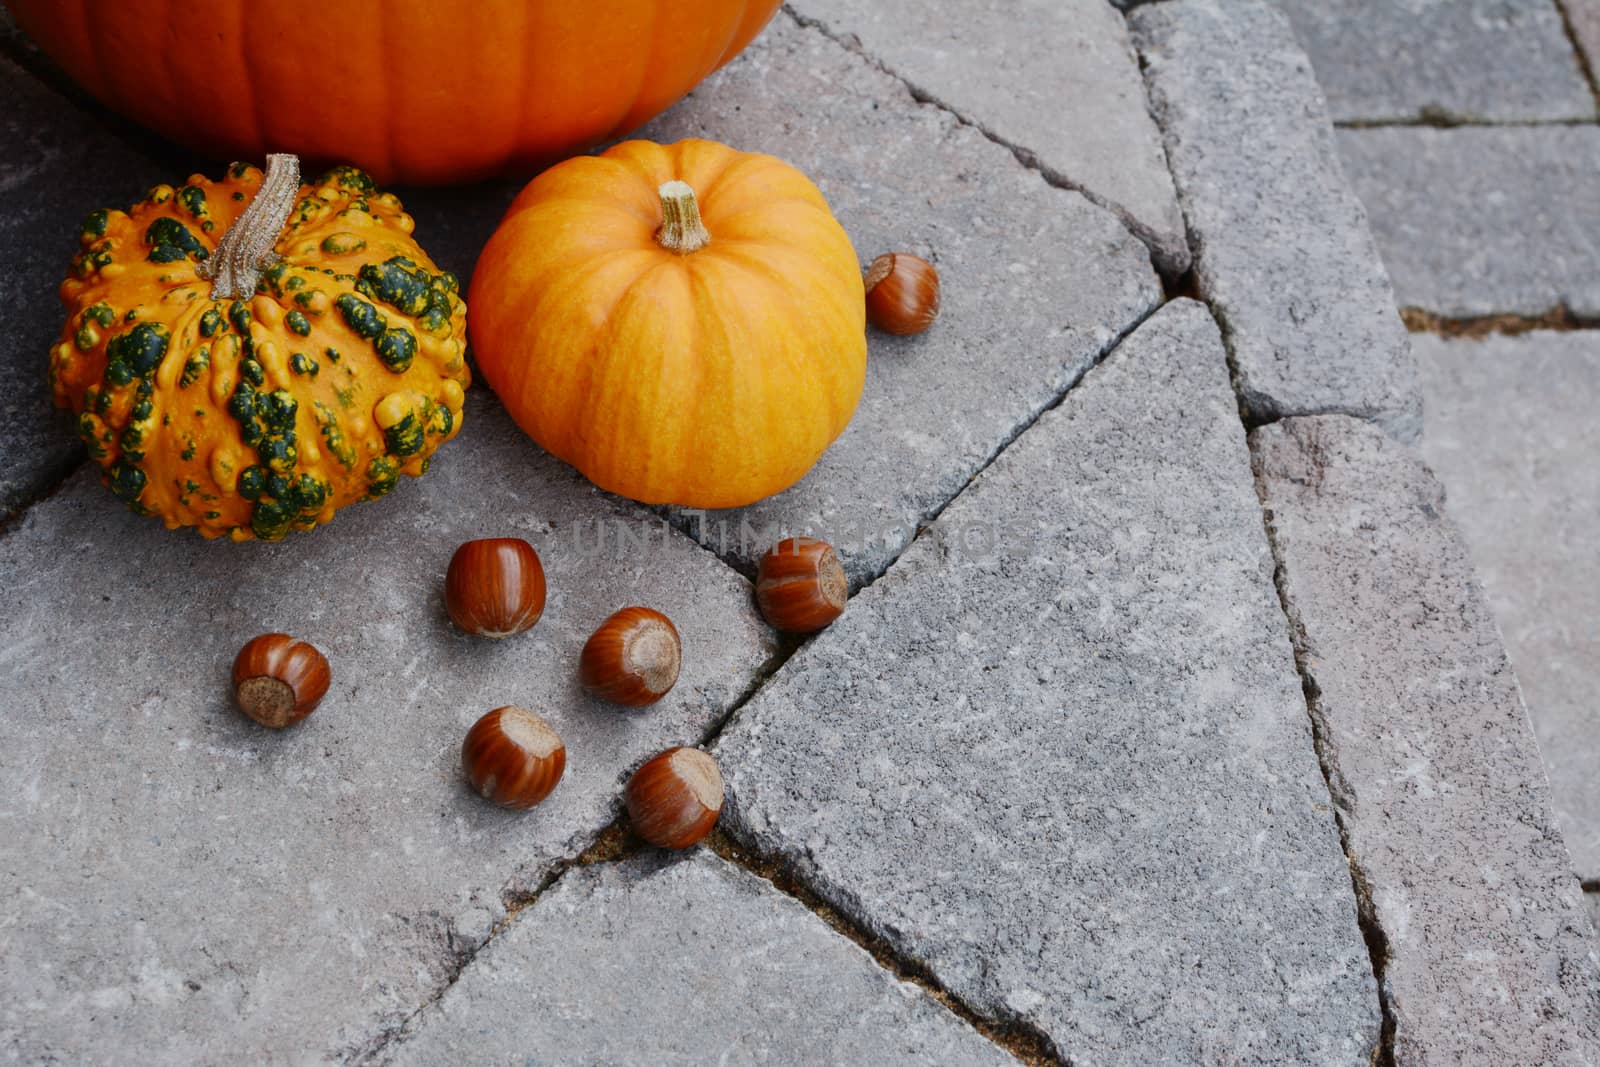 Ornamental gourds and hazelnuts as fall decorations on a stone s by sarahdoow